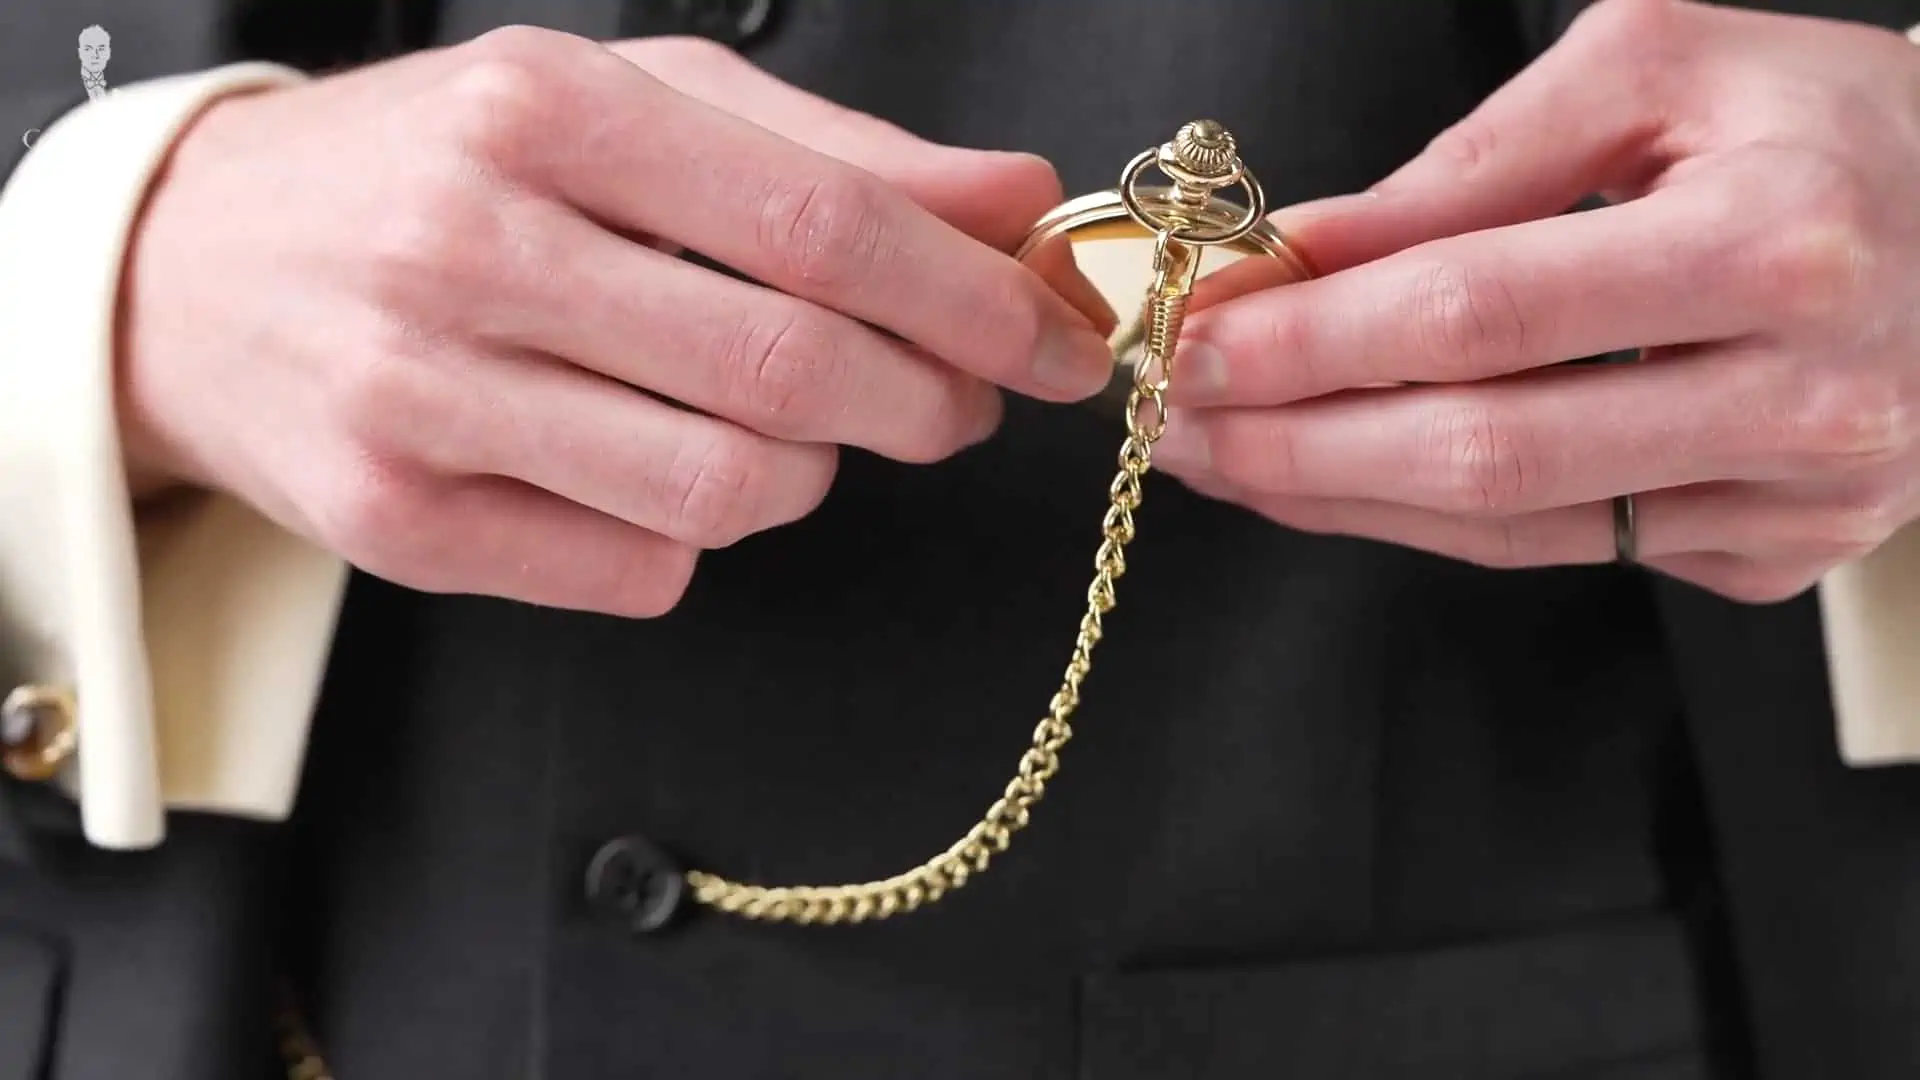 Preston's gold pocket watch is one of his most complimented items